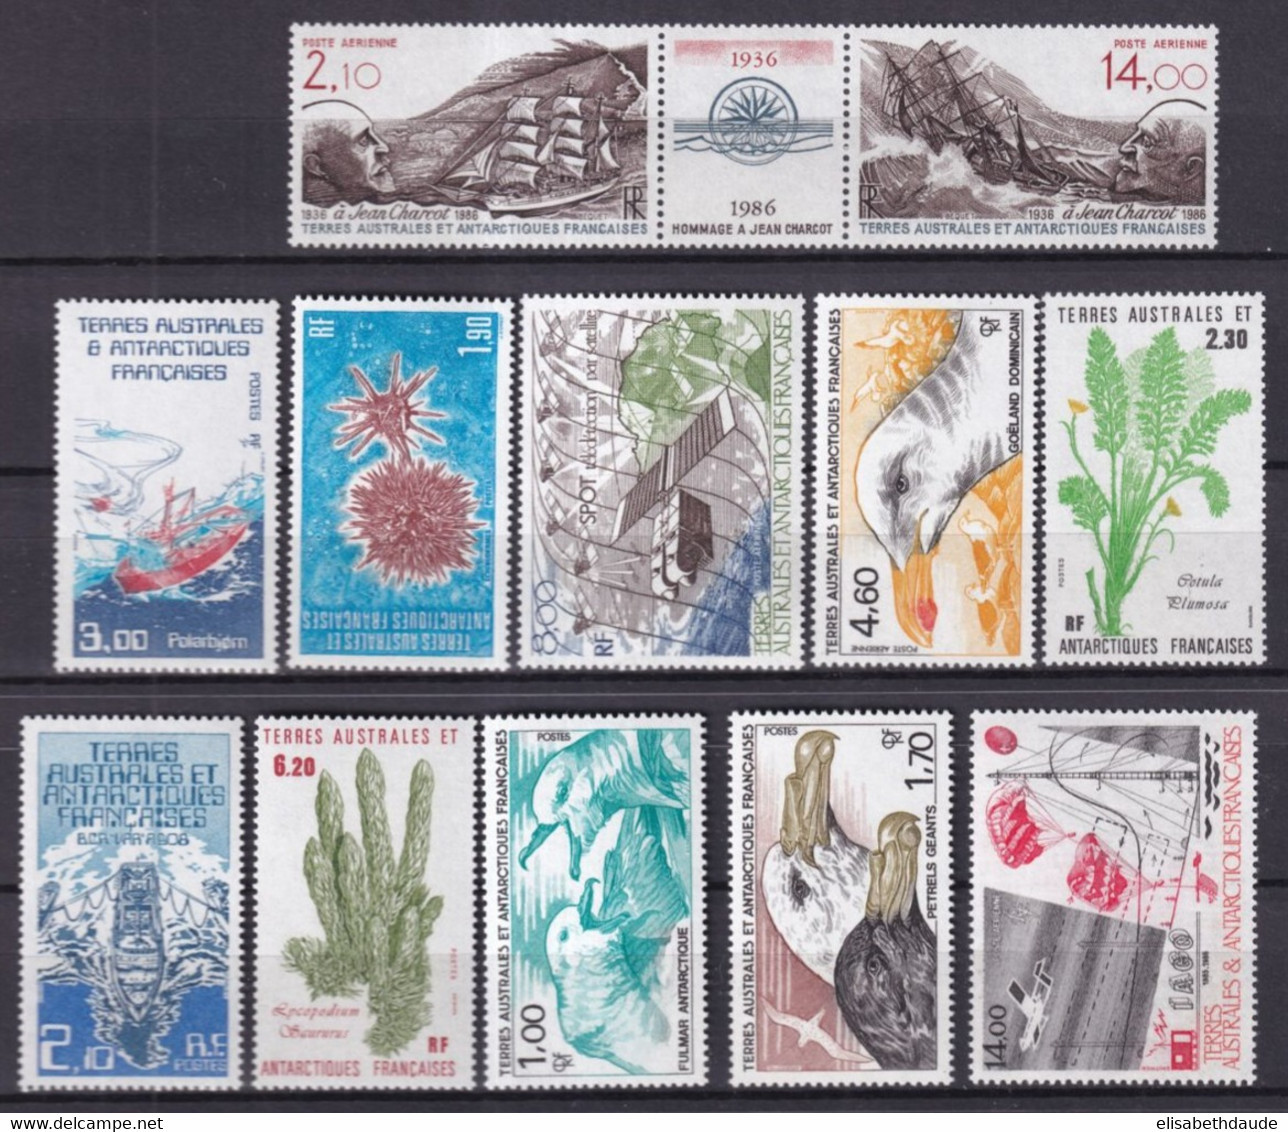 TAAF - 1986 - ANNEE COMPLETE  AVEC POSTE AERIENNE YVERT N° 115/121+ PA92/96 **  MNH - COTE = 33.15 EUR. - Annate Complete